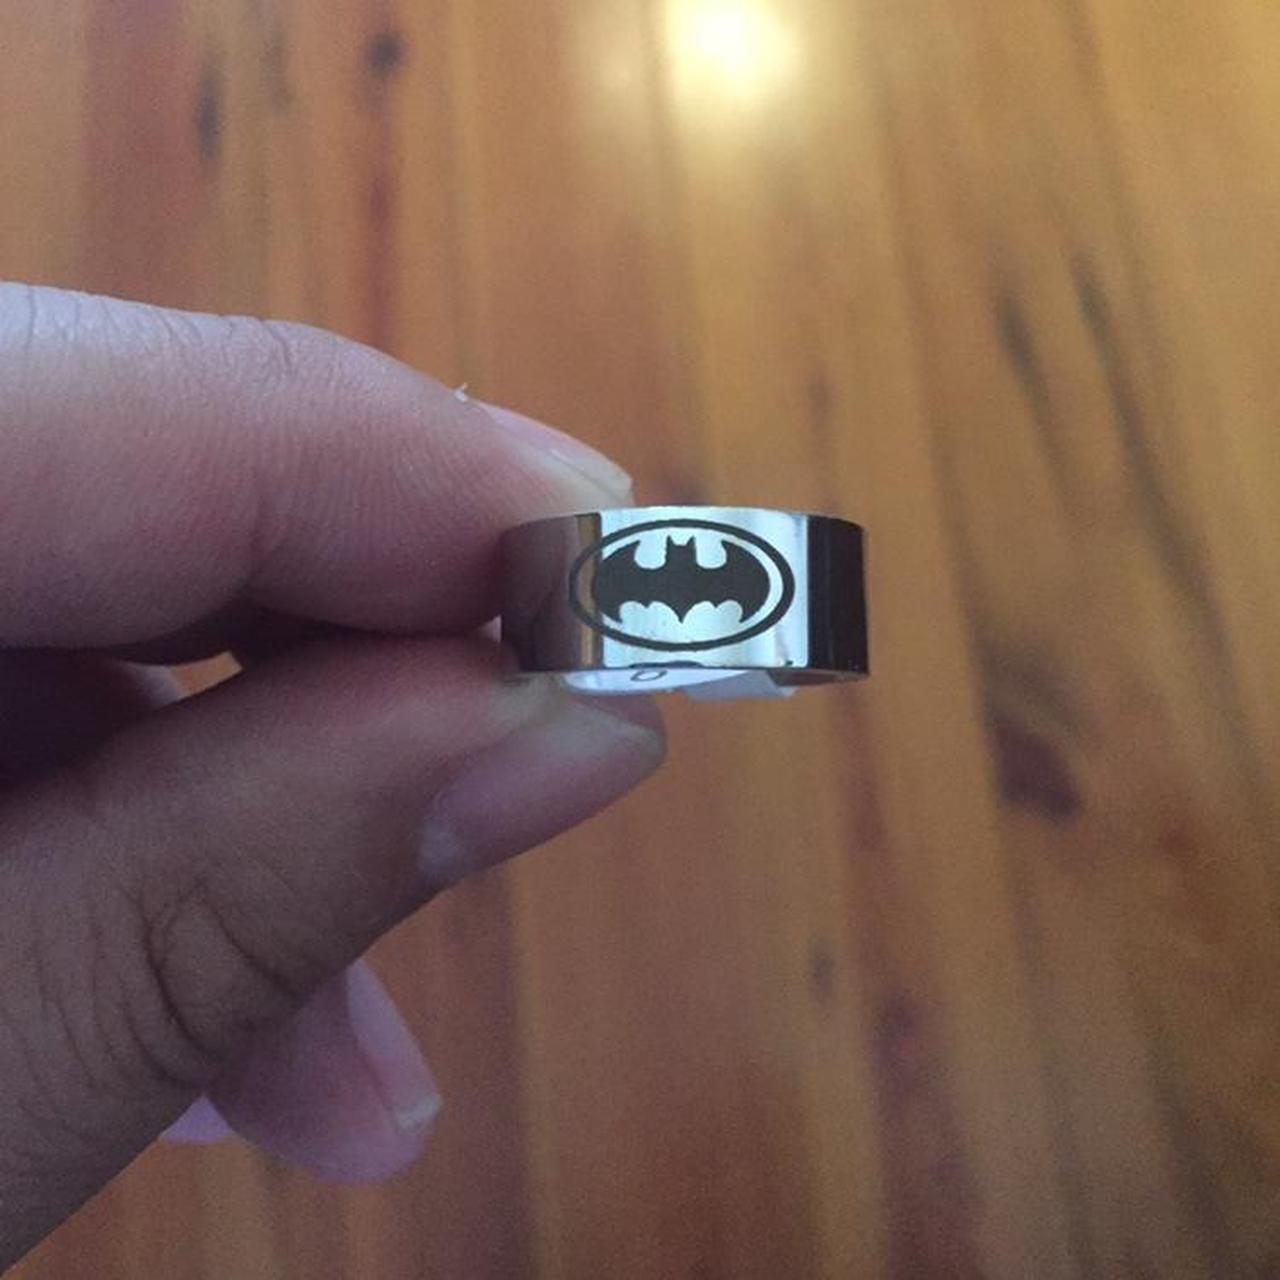 Product Image 2 - Stainless steel Batman ring size